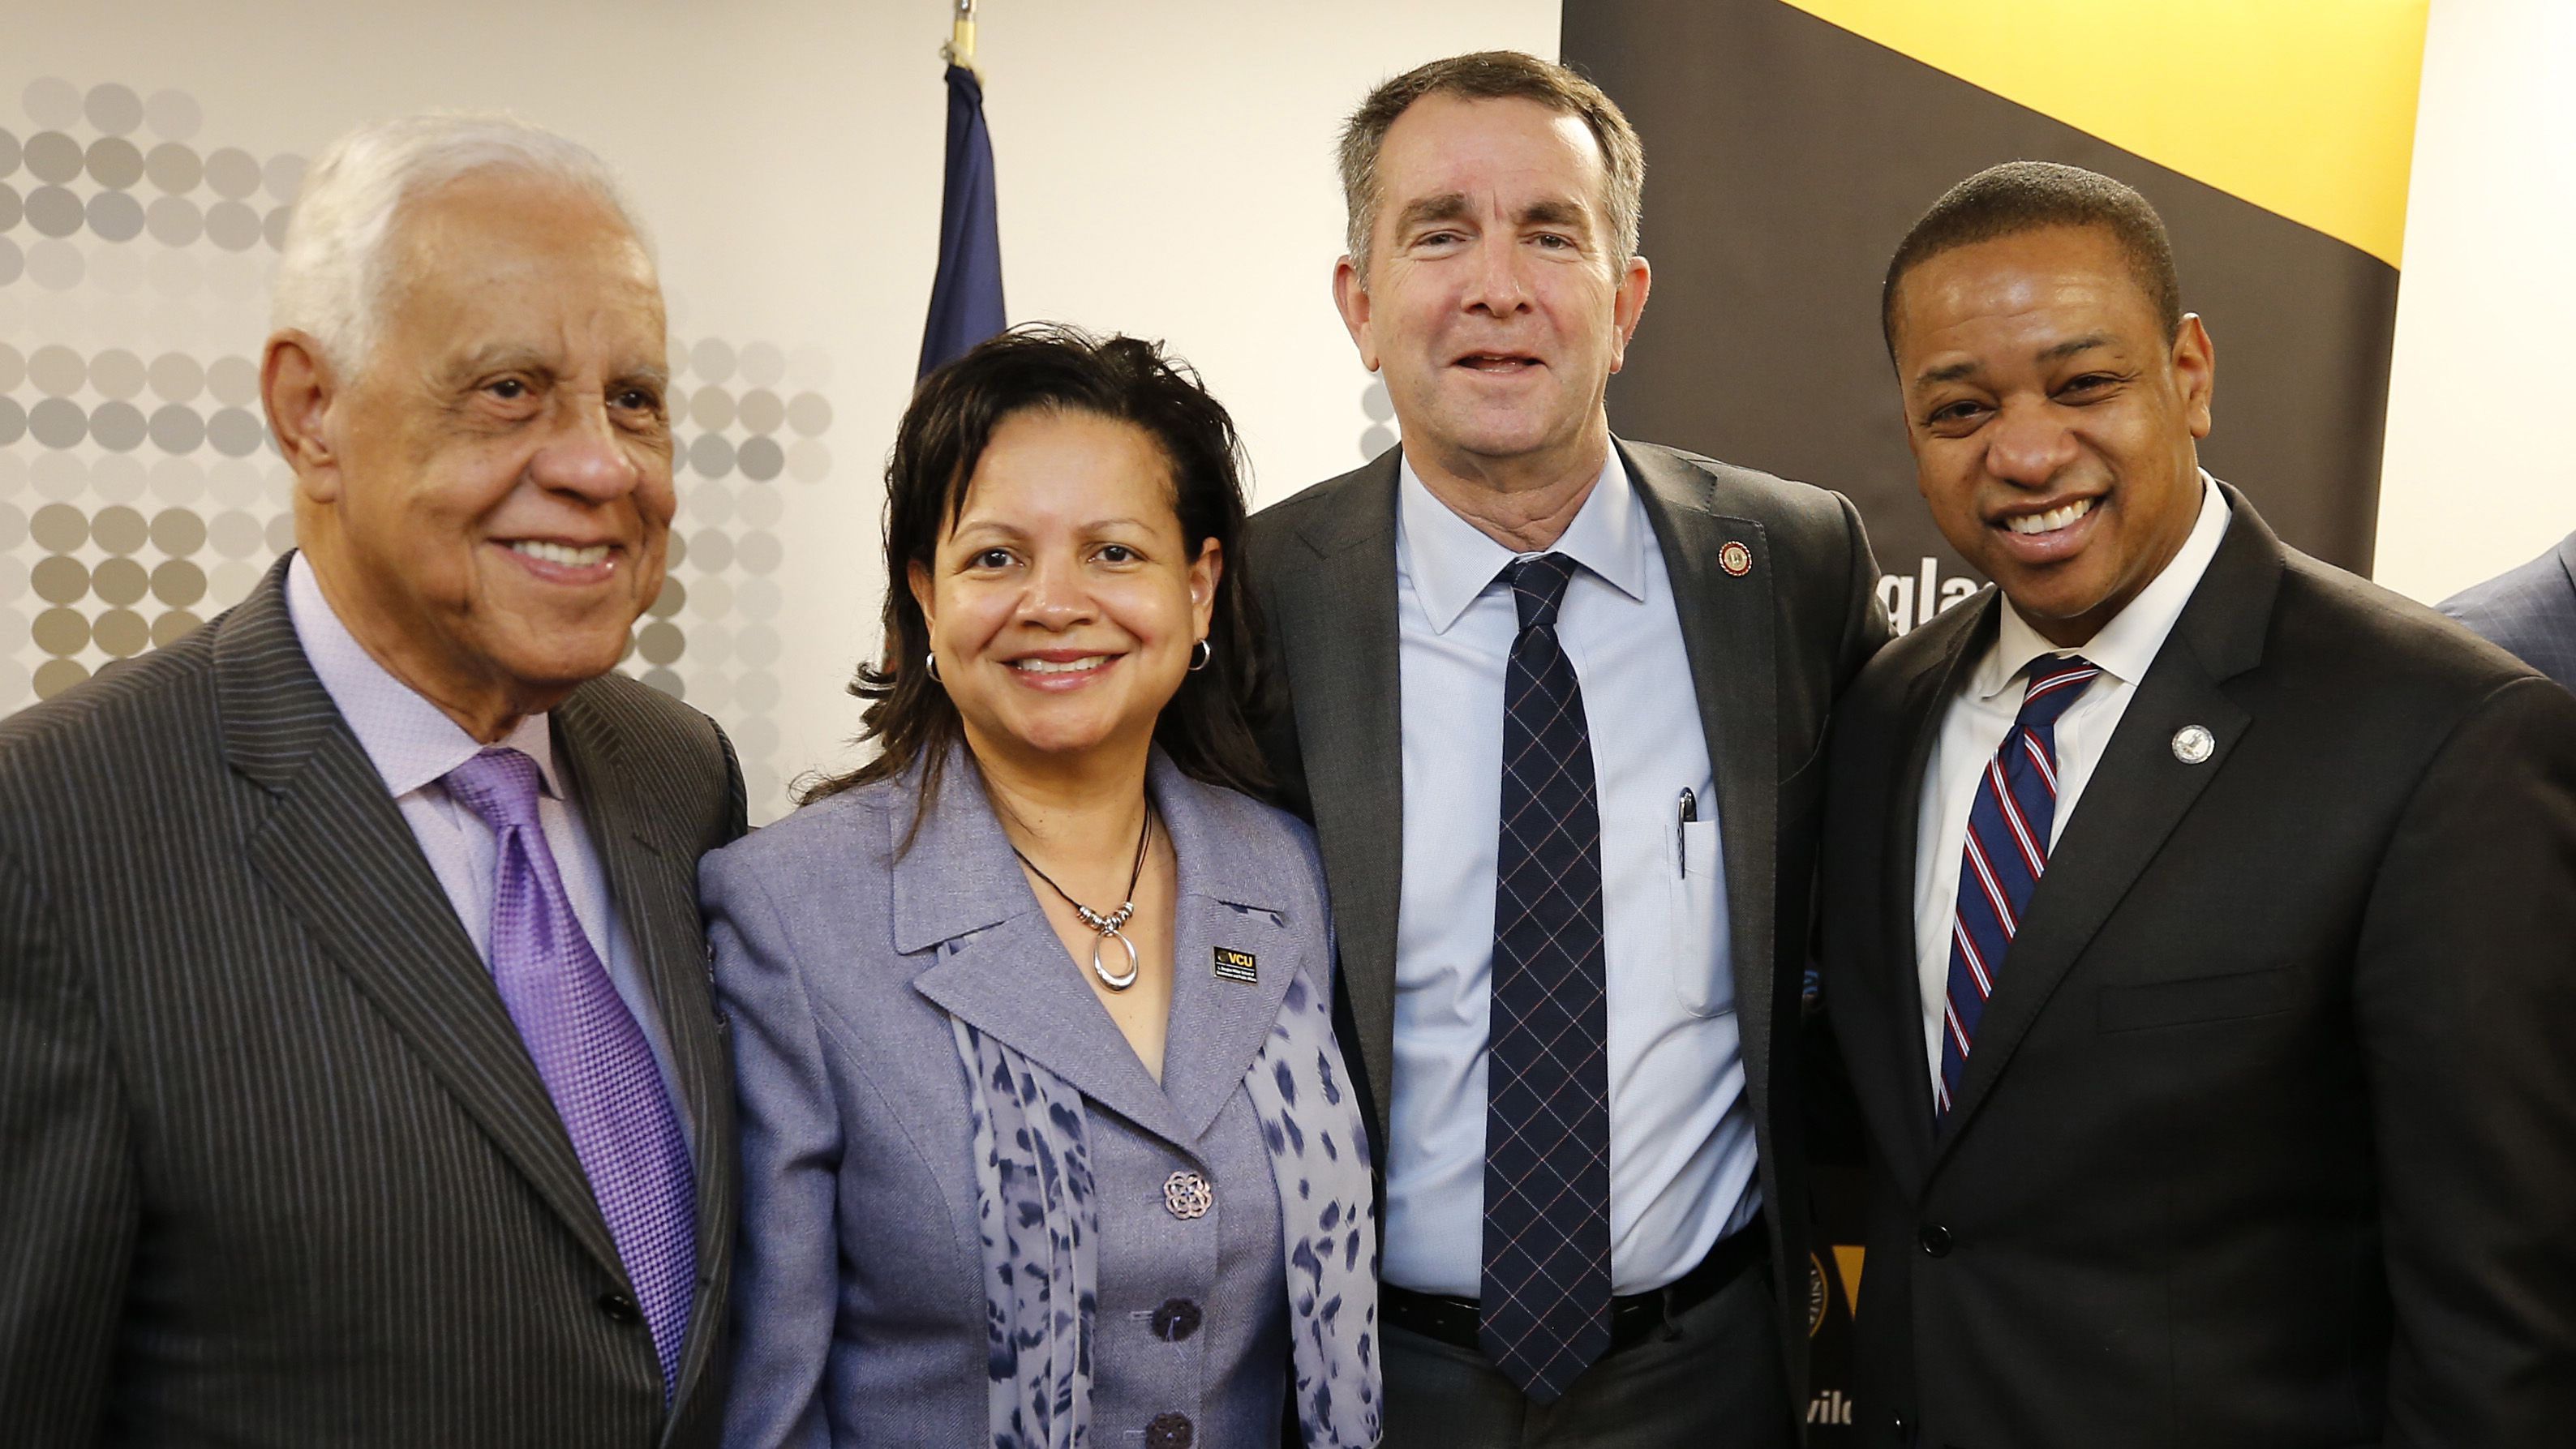 Top: L. Douglas Wilder, Virginia's 66th governor; Interim Dean Susan Gooden, Ph.D.; Governor Ralph Northam; and Lt. Gov. Justin Fairfax. Second: Secretary of Commerce and Trade Brian Ball; Gov.  Northam; Lt. Gov. Fairfax; and Secretary of Education Atif Qarni. Below: Gov. Wilder, Dr. Gooden and Gov. Northam listen to VCU Provost Gail Hackett's welcoming remarks.